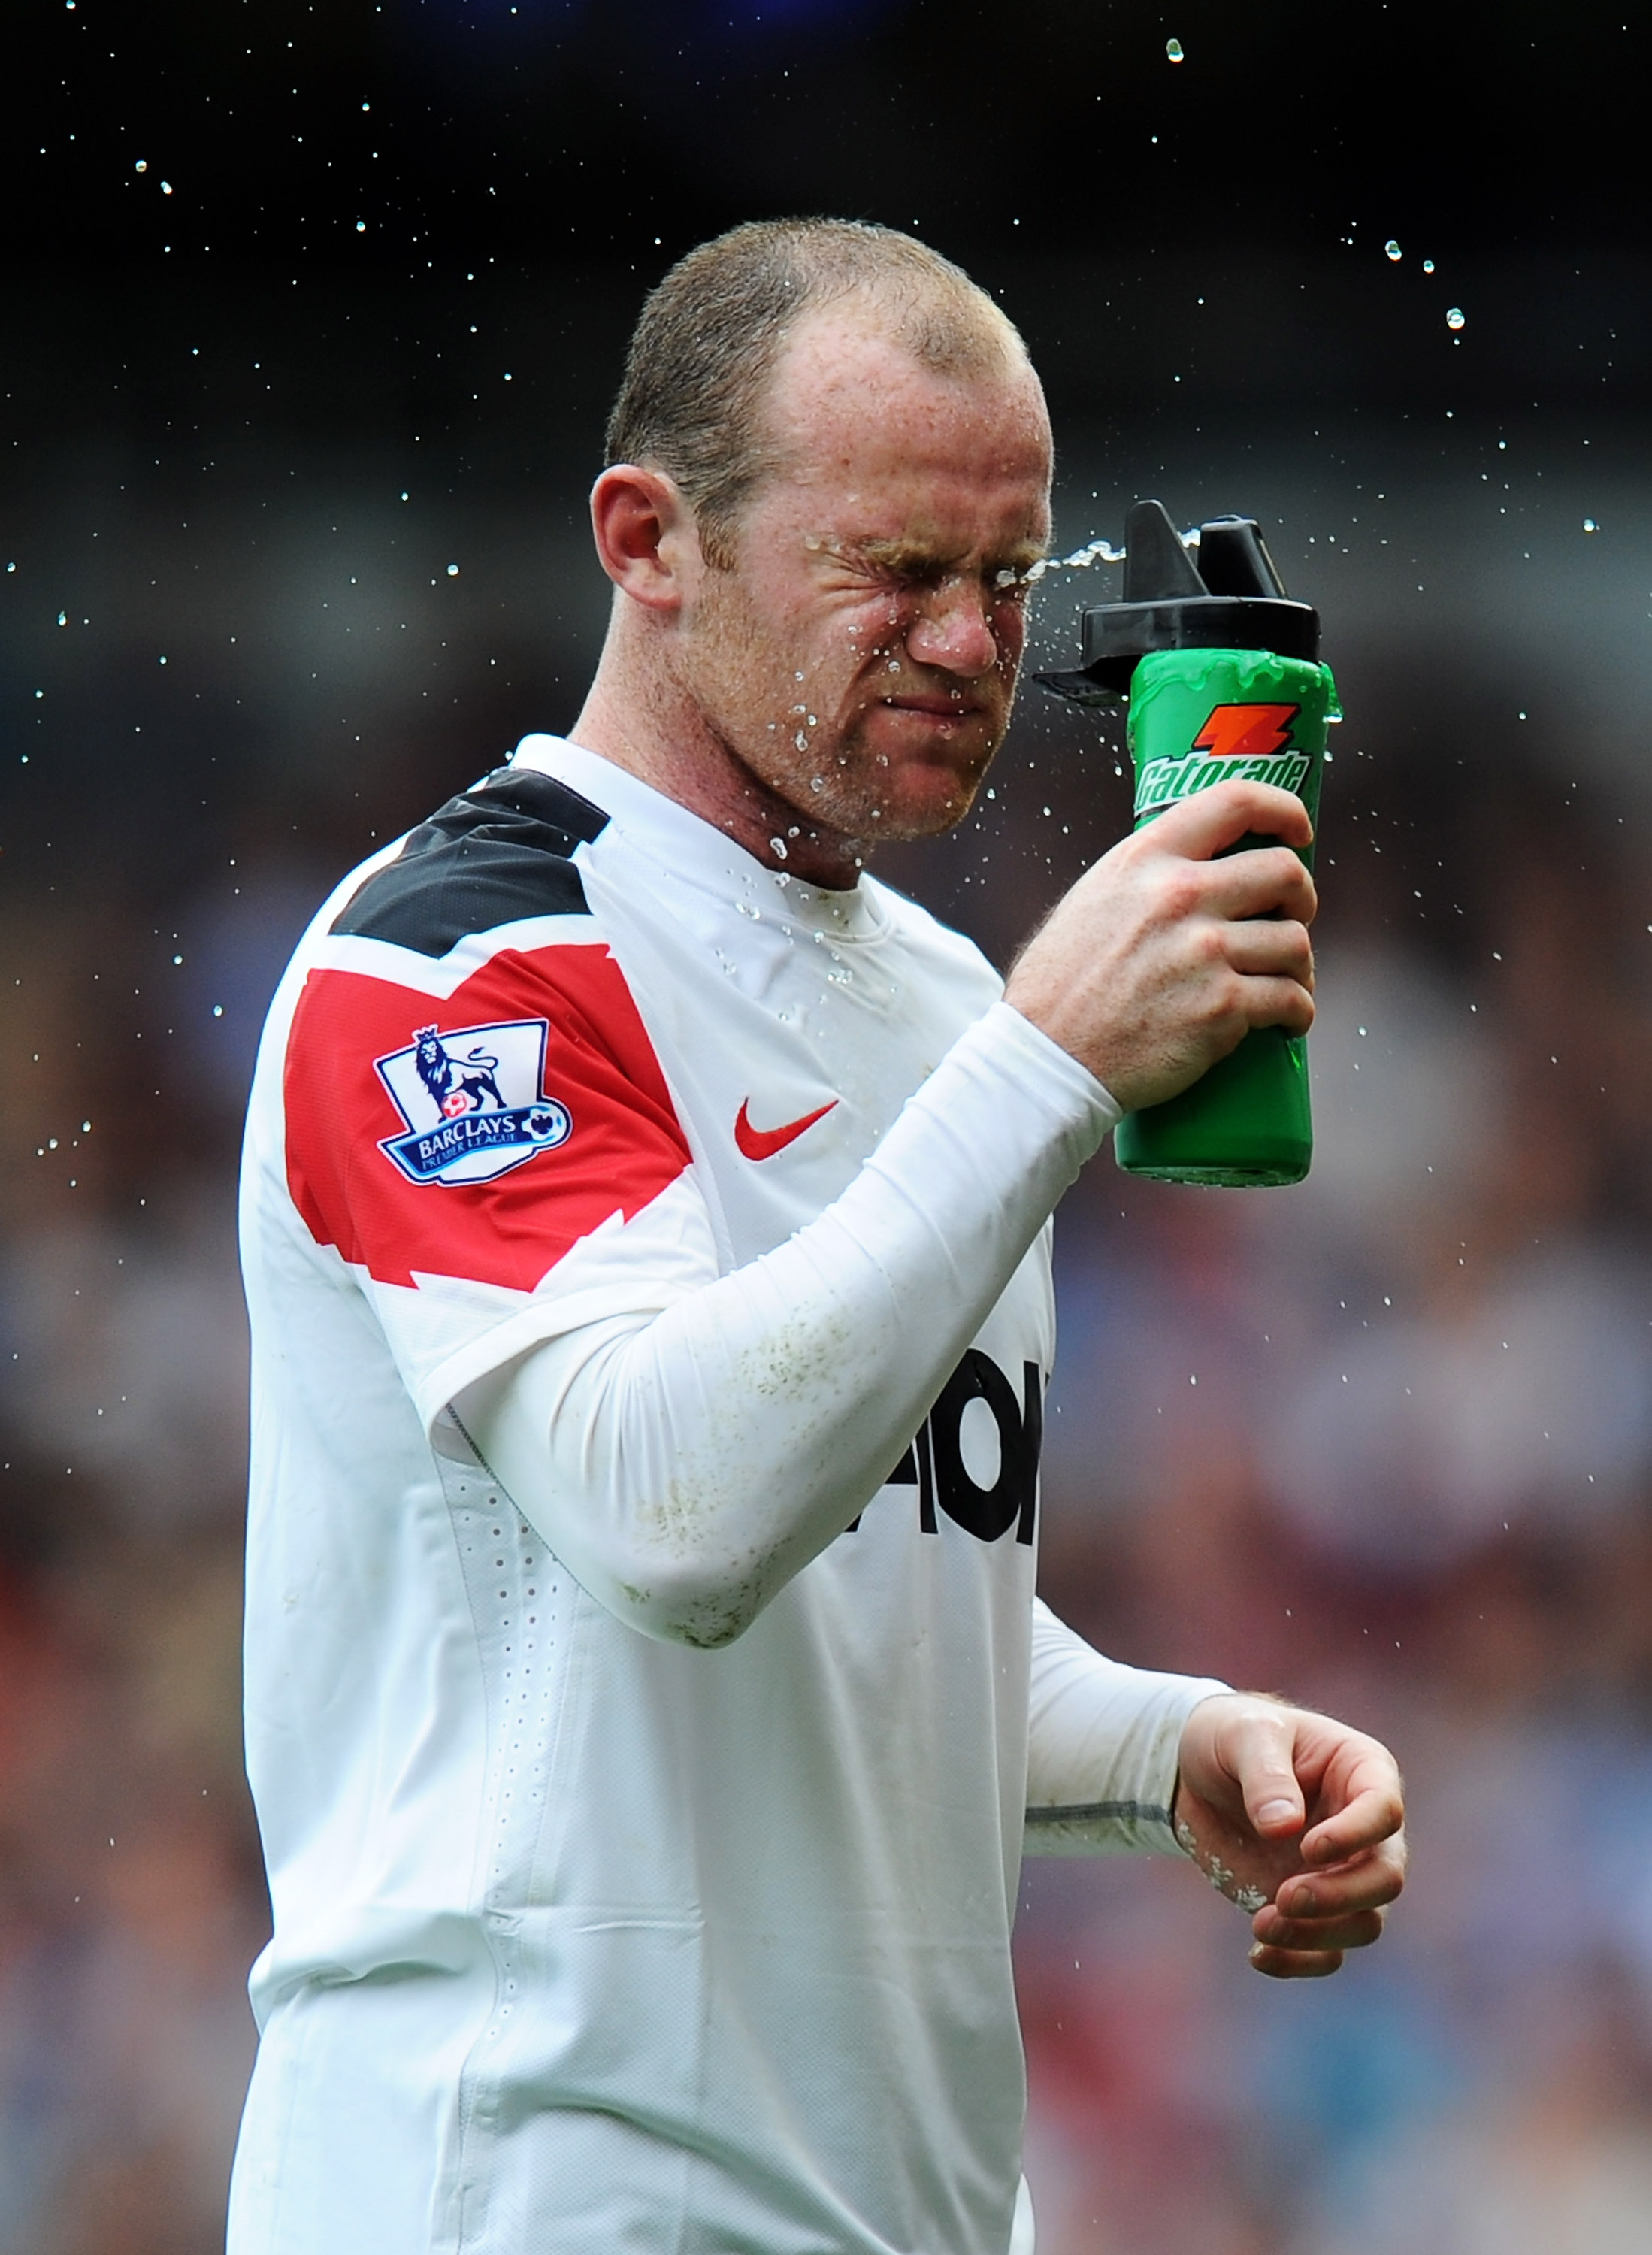 LONDON, ENGLAND - APRIL 02:  Wayne Rooney of Manchester United feels the heat during the Barclays Premier League match between West Ham United and Manchester United at the Boleyn Ground on April 2, 2011 in London, England.  (Photo by Mike Hewitt/Getty Ima